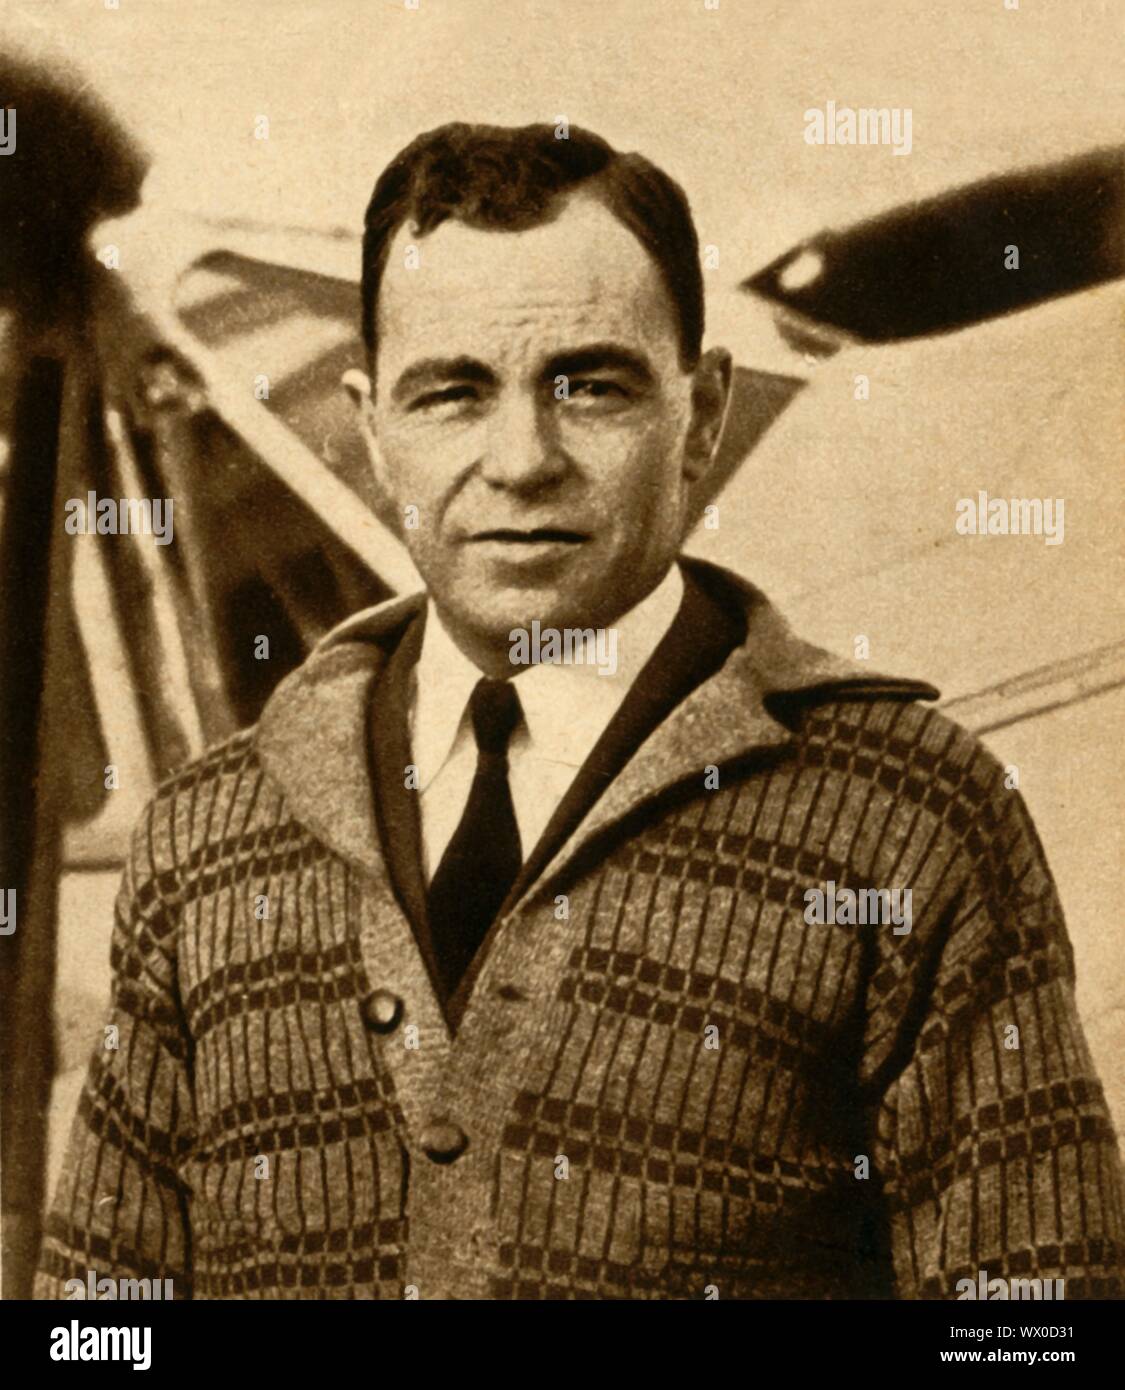 Bert Hinkler, 1933. Portrait of Australian pioneer aviator and inventor Hinkler (1892-1933), 'who in 1928 set up a record of 15 1/2 days for a solo flight to Australia, set out to beat his victor, C.R.W. Scott and the latter's conqueror, J.A. Mollison. After he started - silence. Only after some time of frantic searching was his wrecked machine and body found in the Appennines. So passed one of Britain's typical great men: modest, unassuming, efficient.' Hinkler, dubbed 'Australian Lone Eagle', designed and built early aircraft and was the first person to fly solo from England to Australia. He Stock Photo